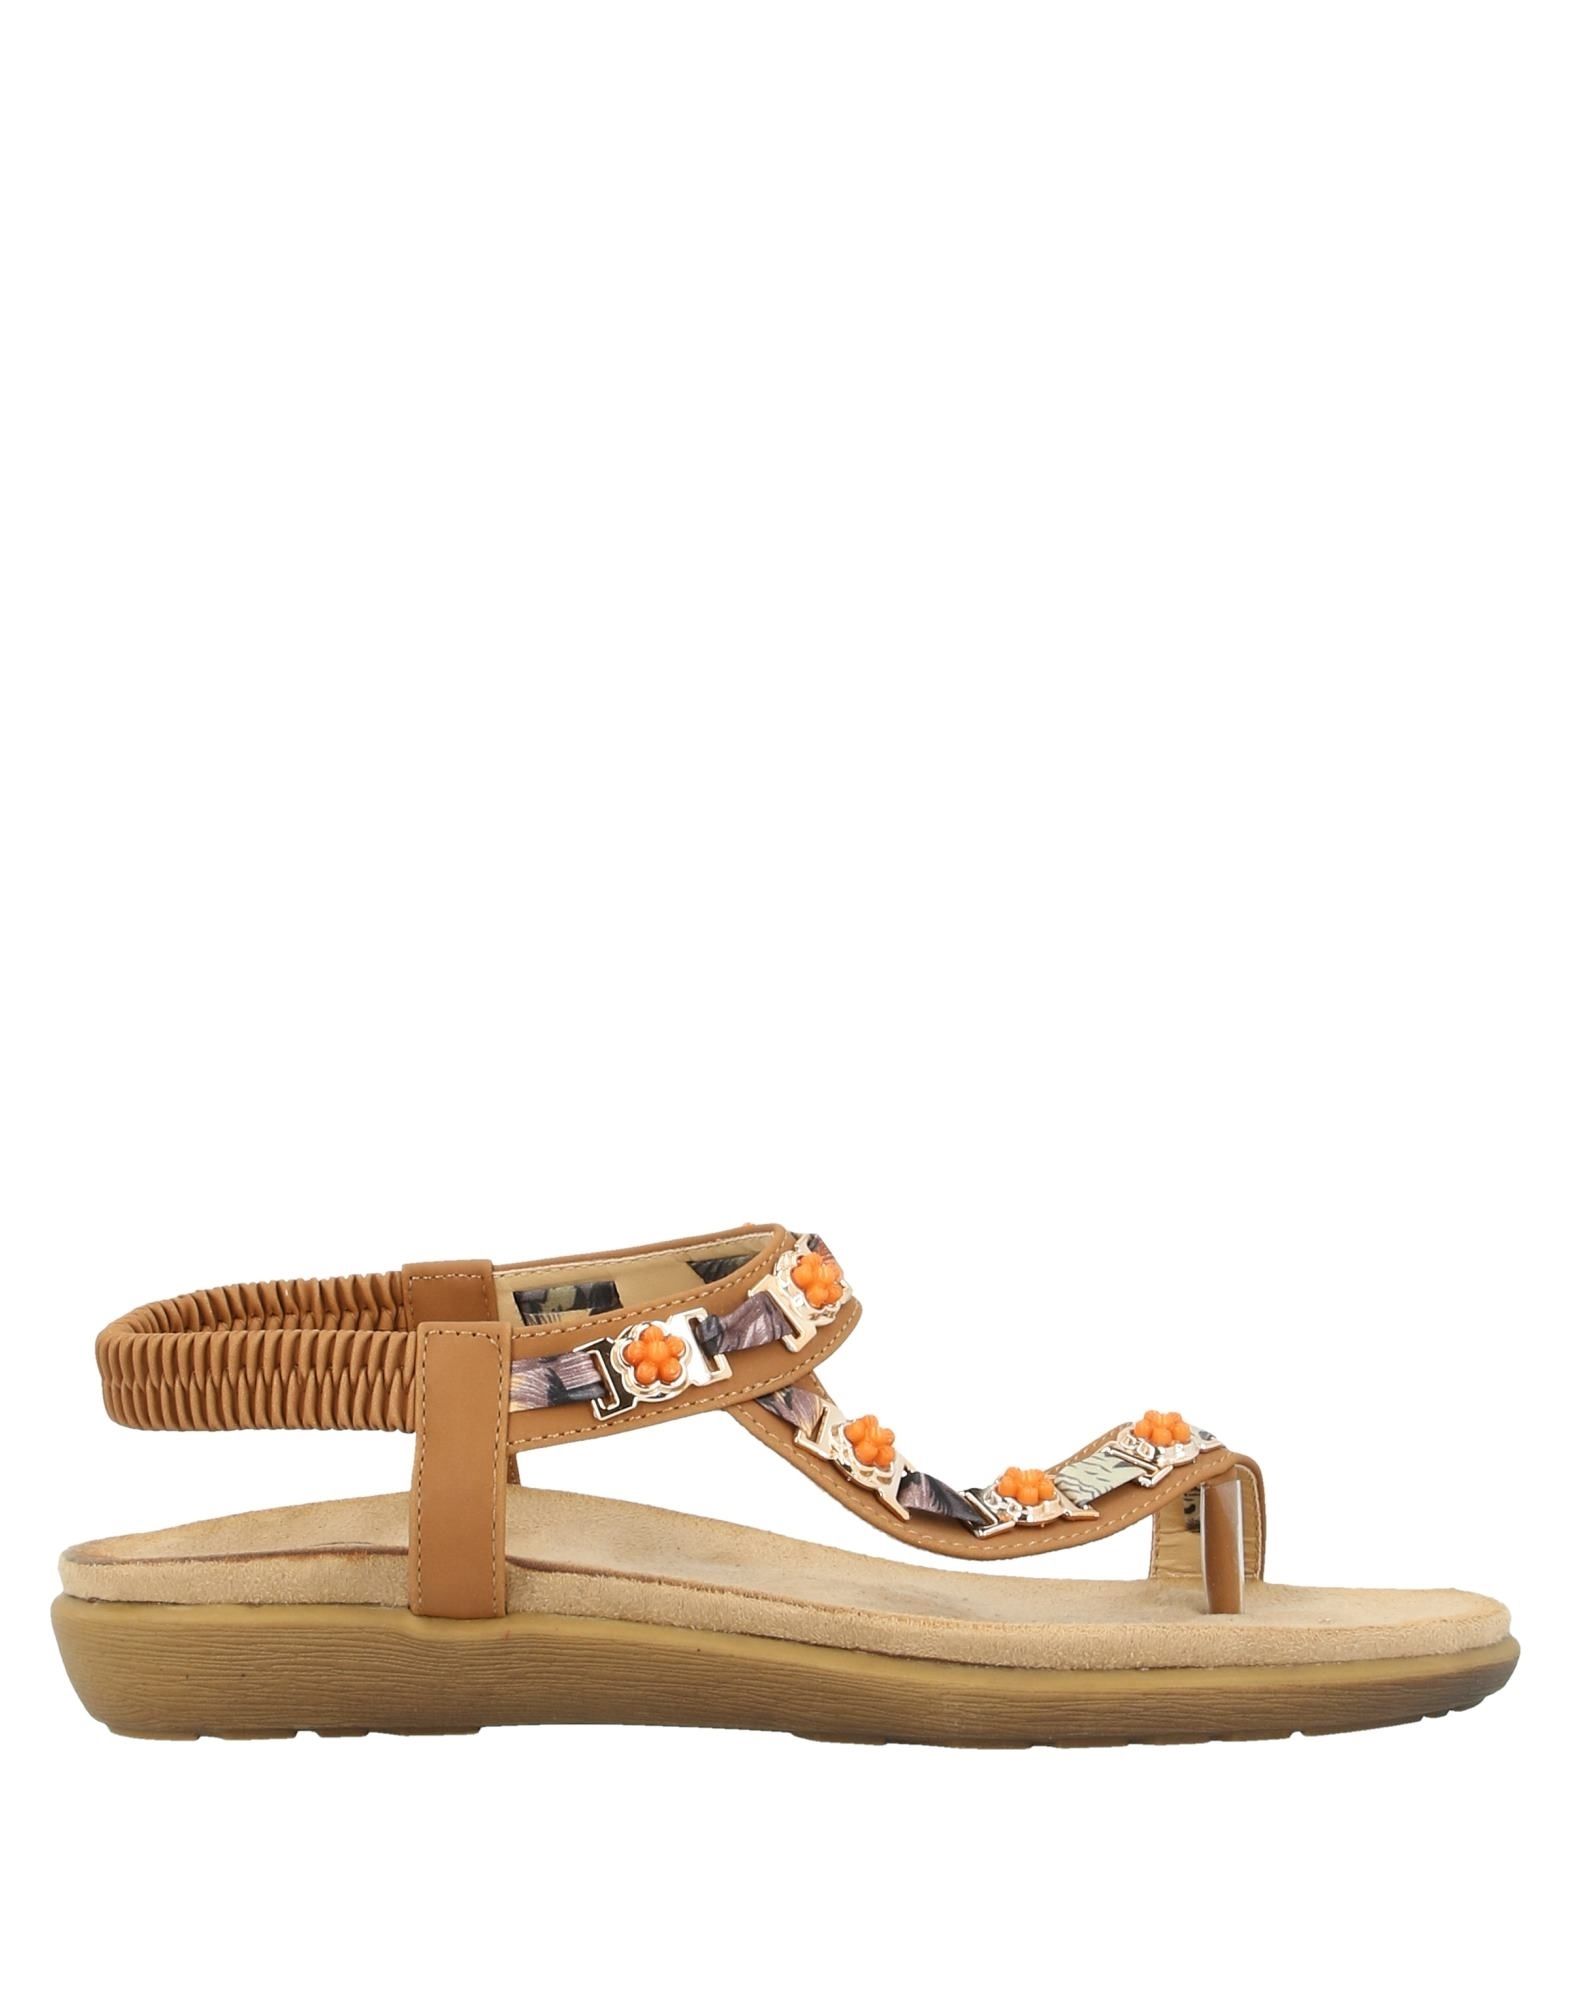 EXE' Toe strap sandals